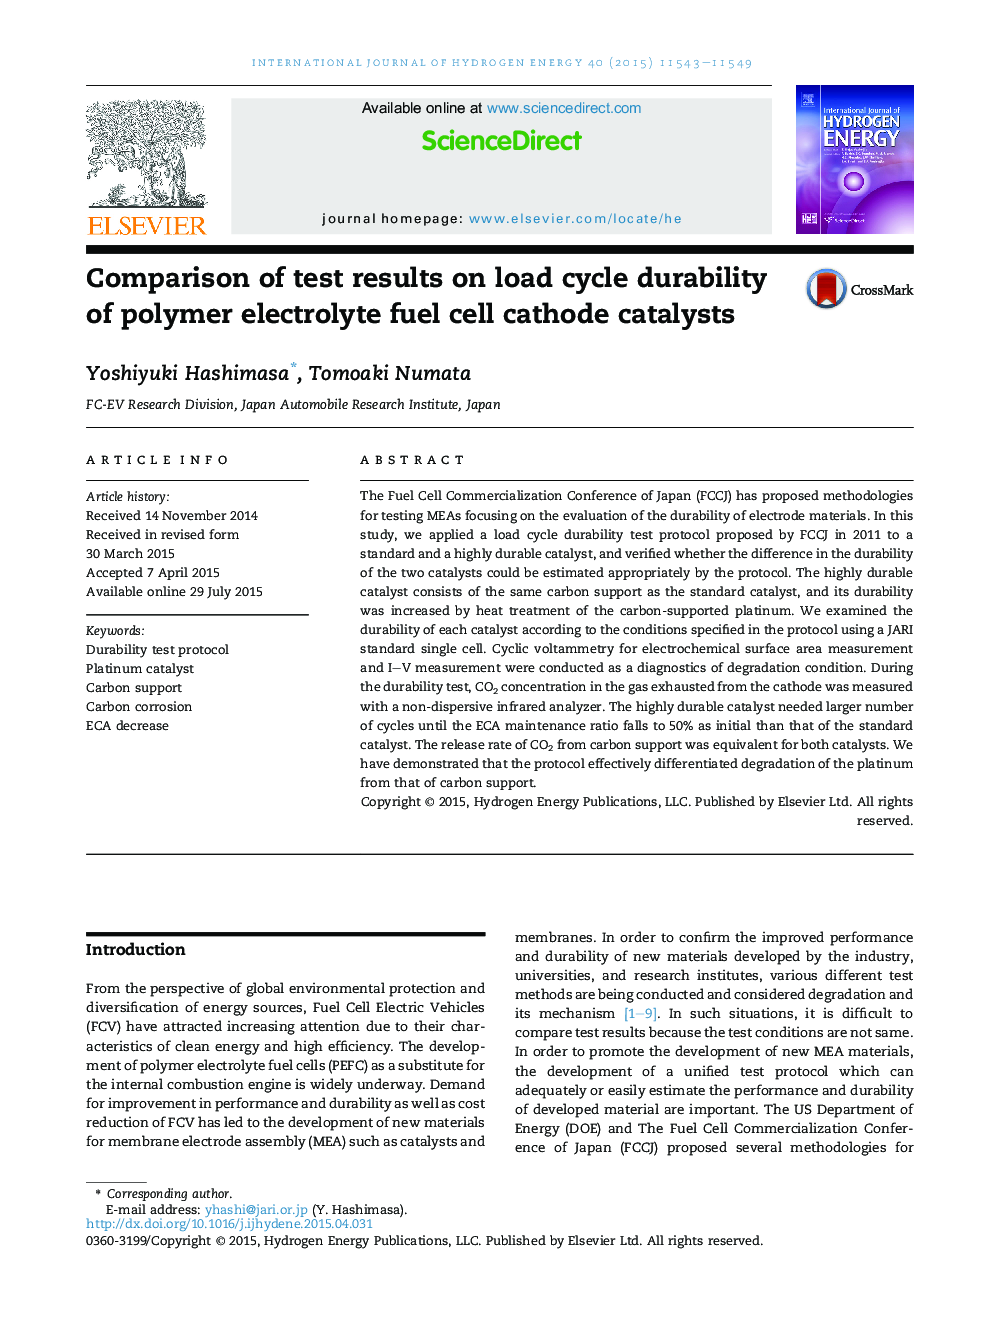 Comparison of test results on load cycle durability of polymer electrolyte fuel cell cathode catalysts